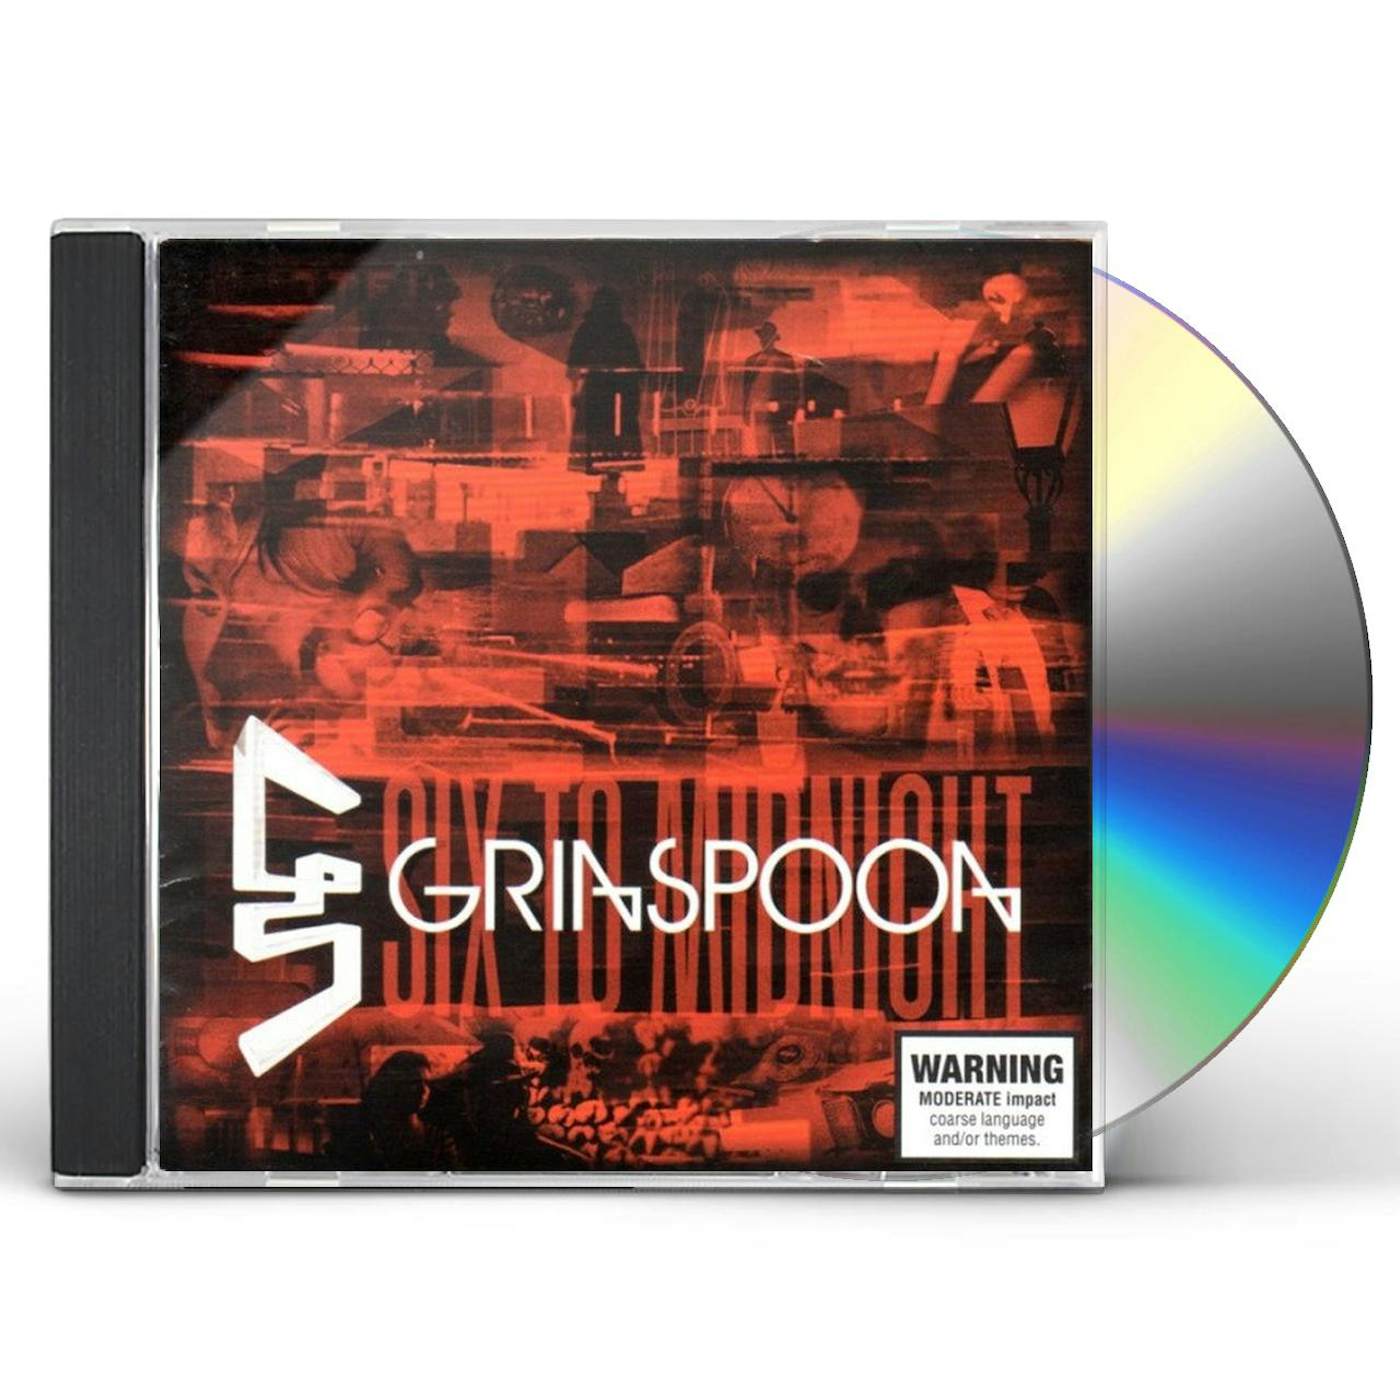 Grinspoon SIX TO MIDNIGHT CD